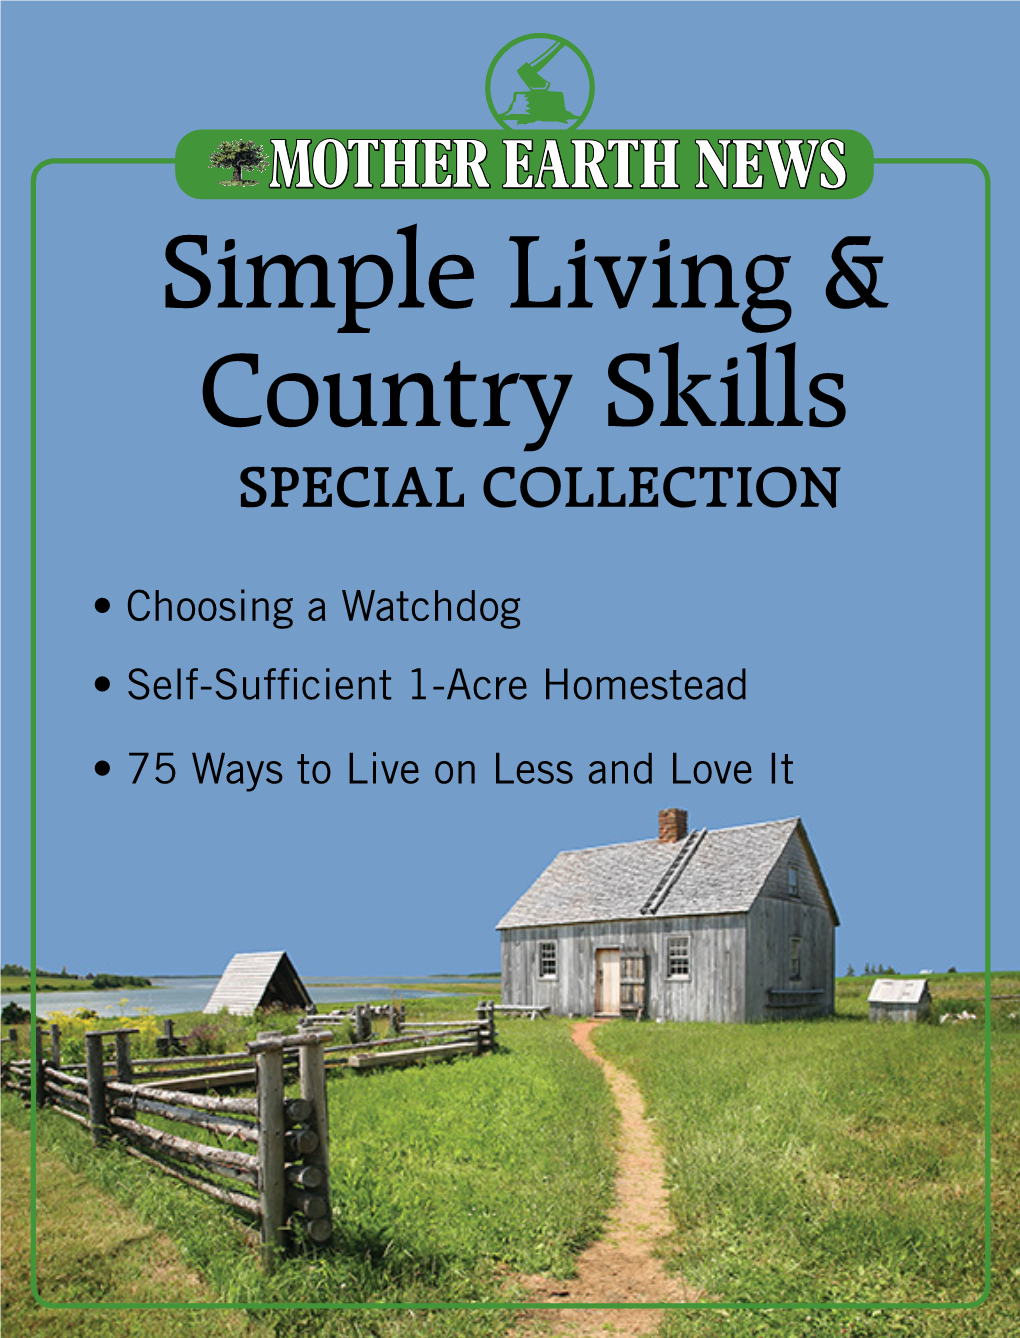 Simple Living & Country Skills